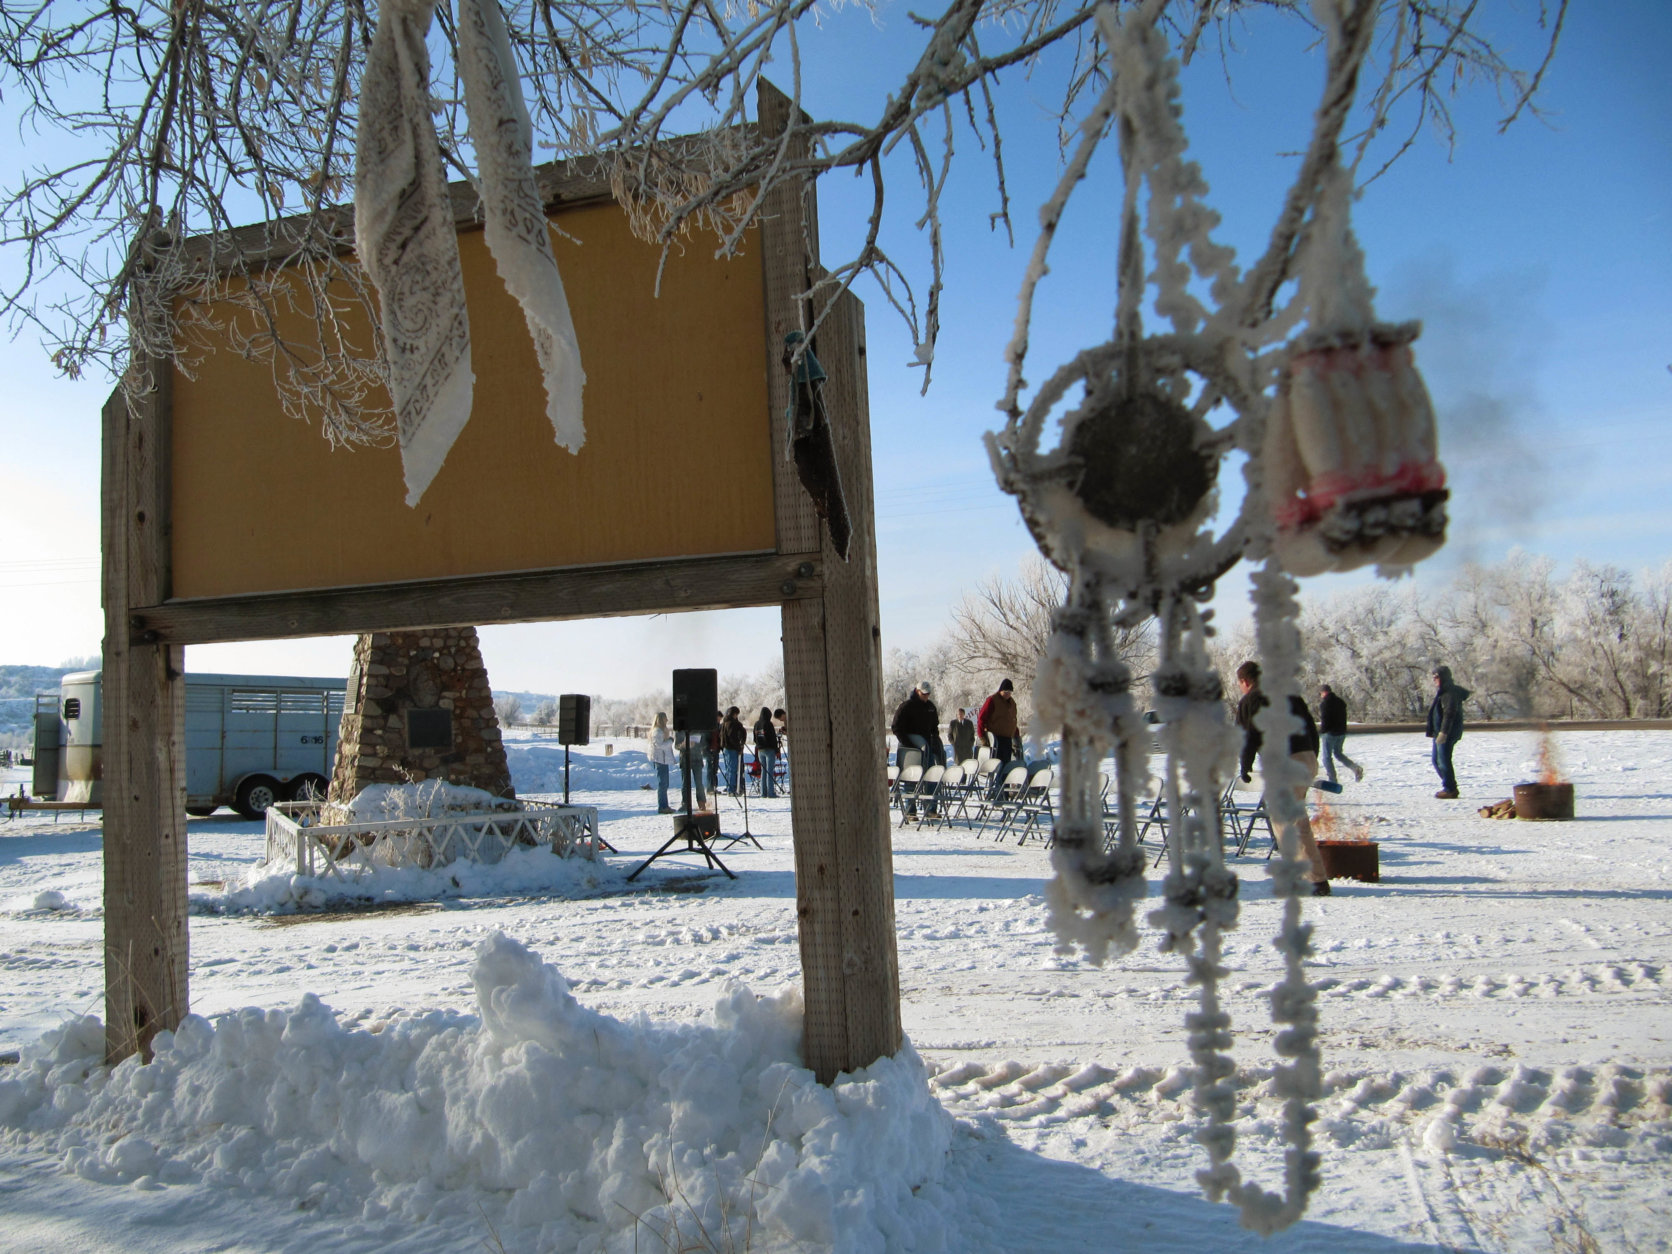 In this Jan. 29, 2010 photo, the National Historic Landmark where the Northwestern Shoshone suffered a massacre in 1863 is seen near Preston, Idaho. Tribal members descend each year to the burial ground near the Bear River where soldiers felled hundreds of their ancestors in one of American history's bloodiest but little remembered massacres. (AP Photo/Jessie L. Bonner)